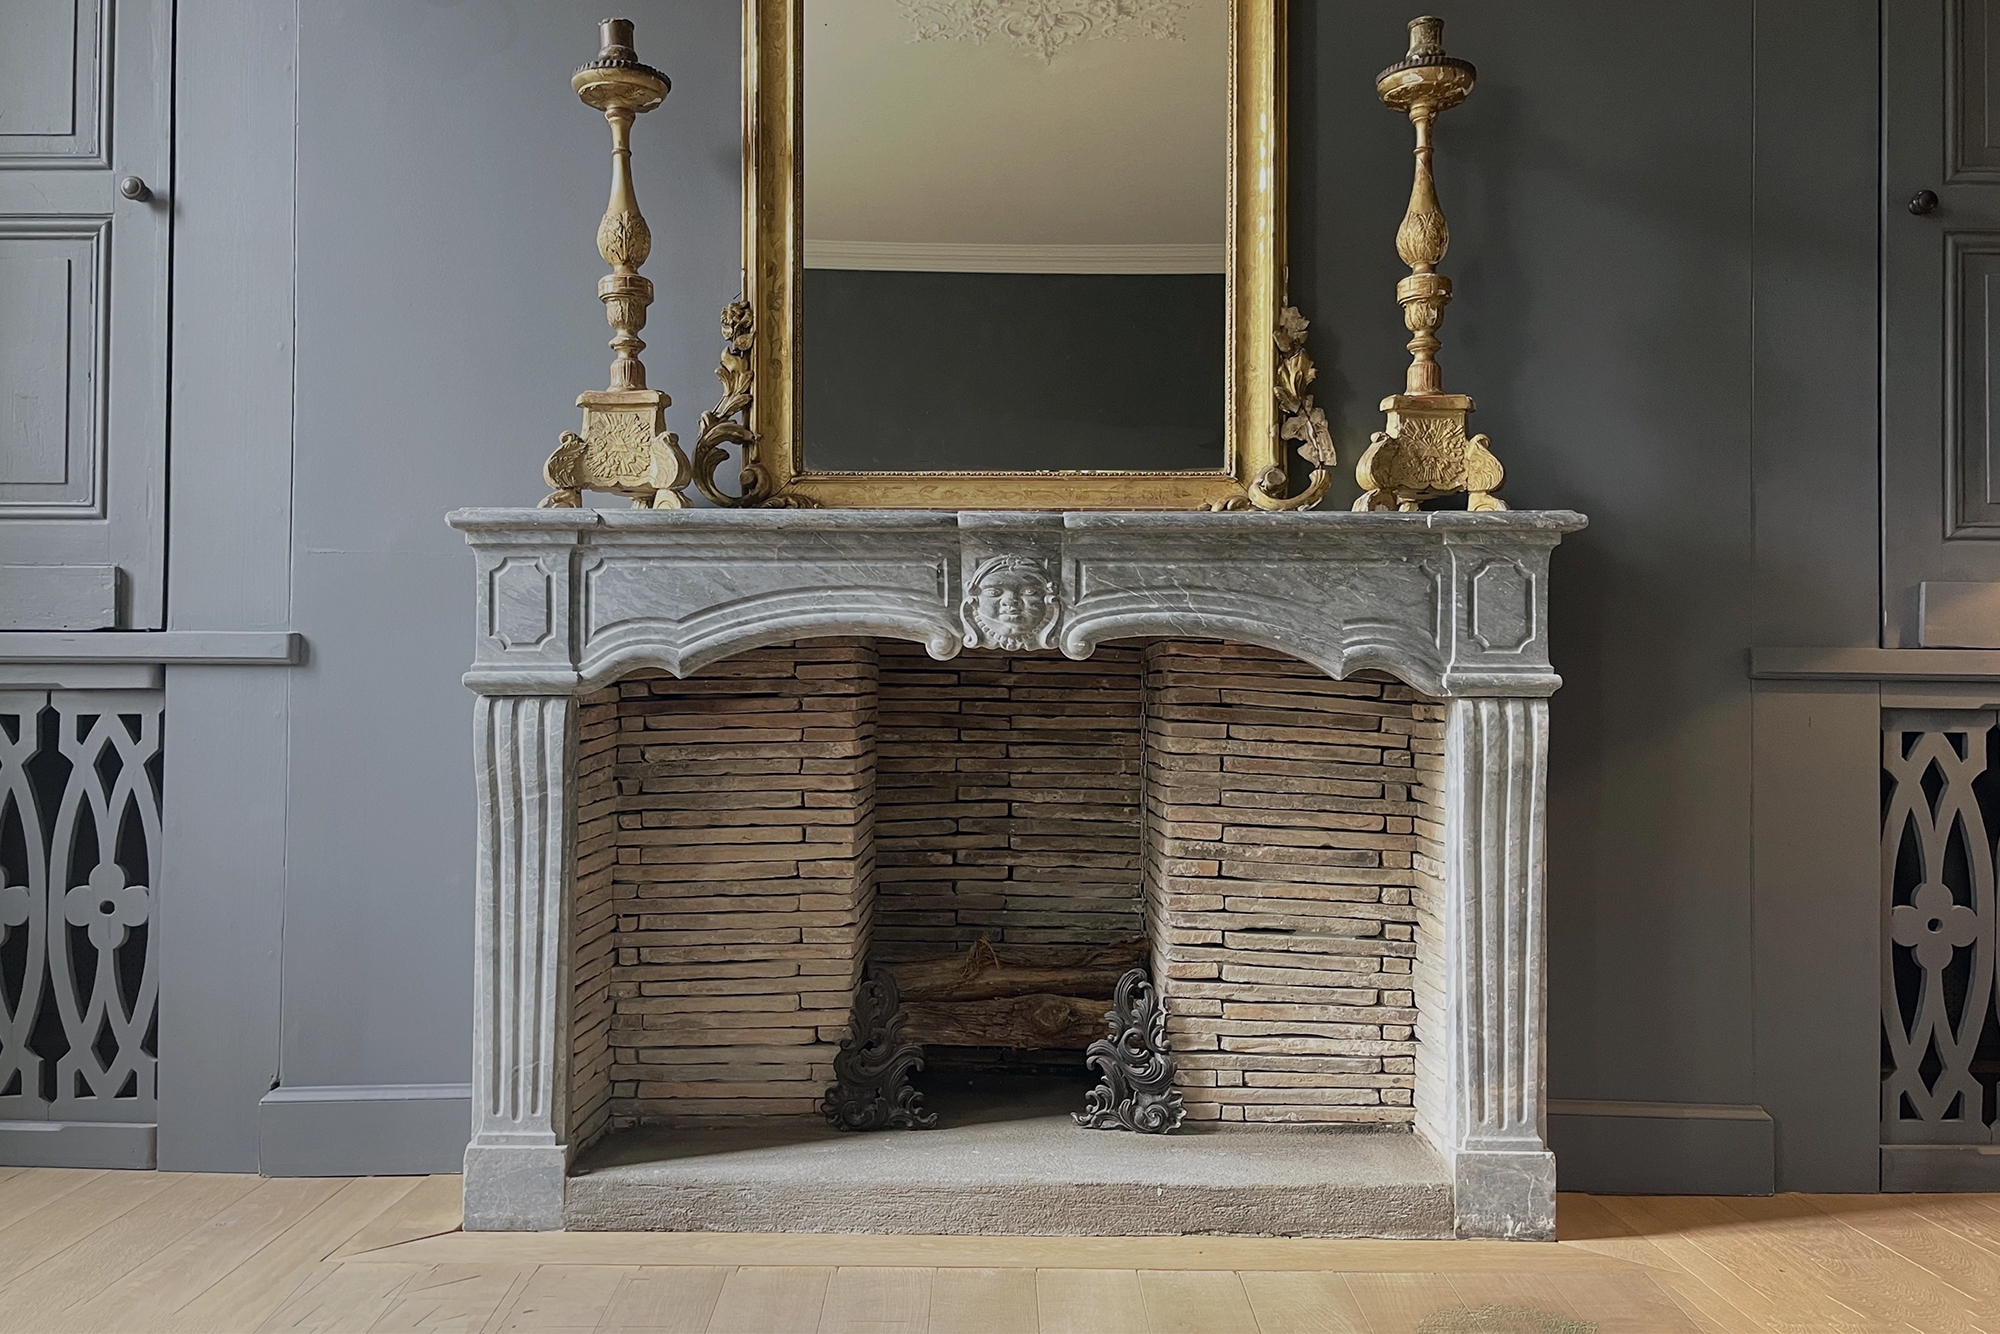 The Artistry and Tradition of the French Fireplace